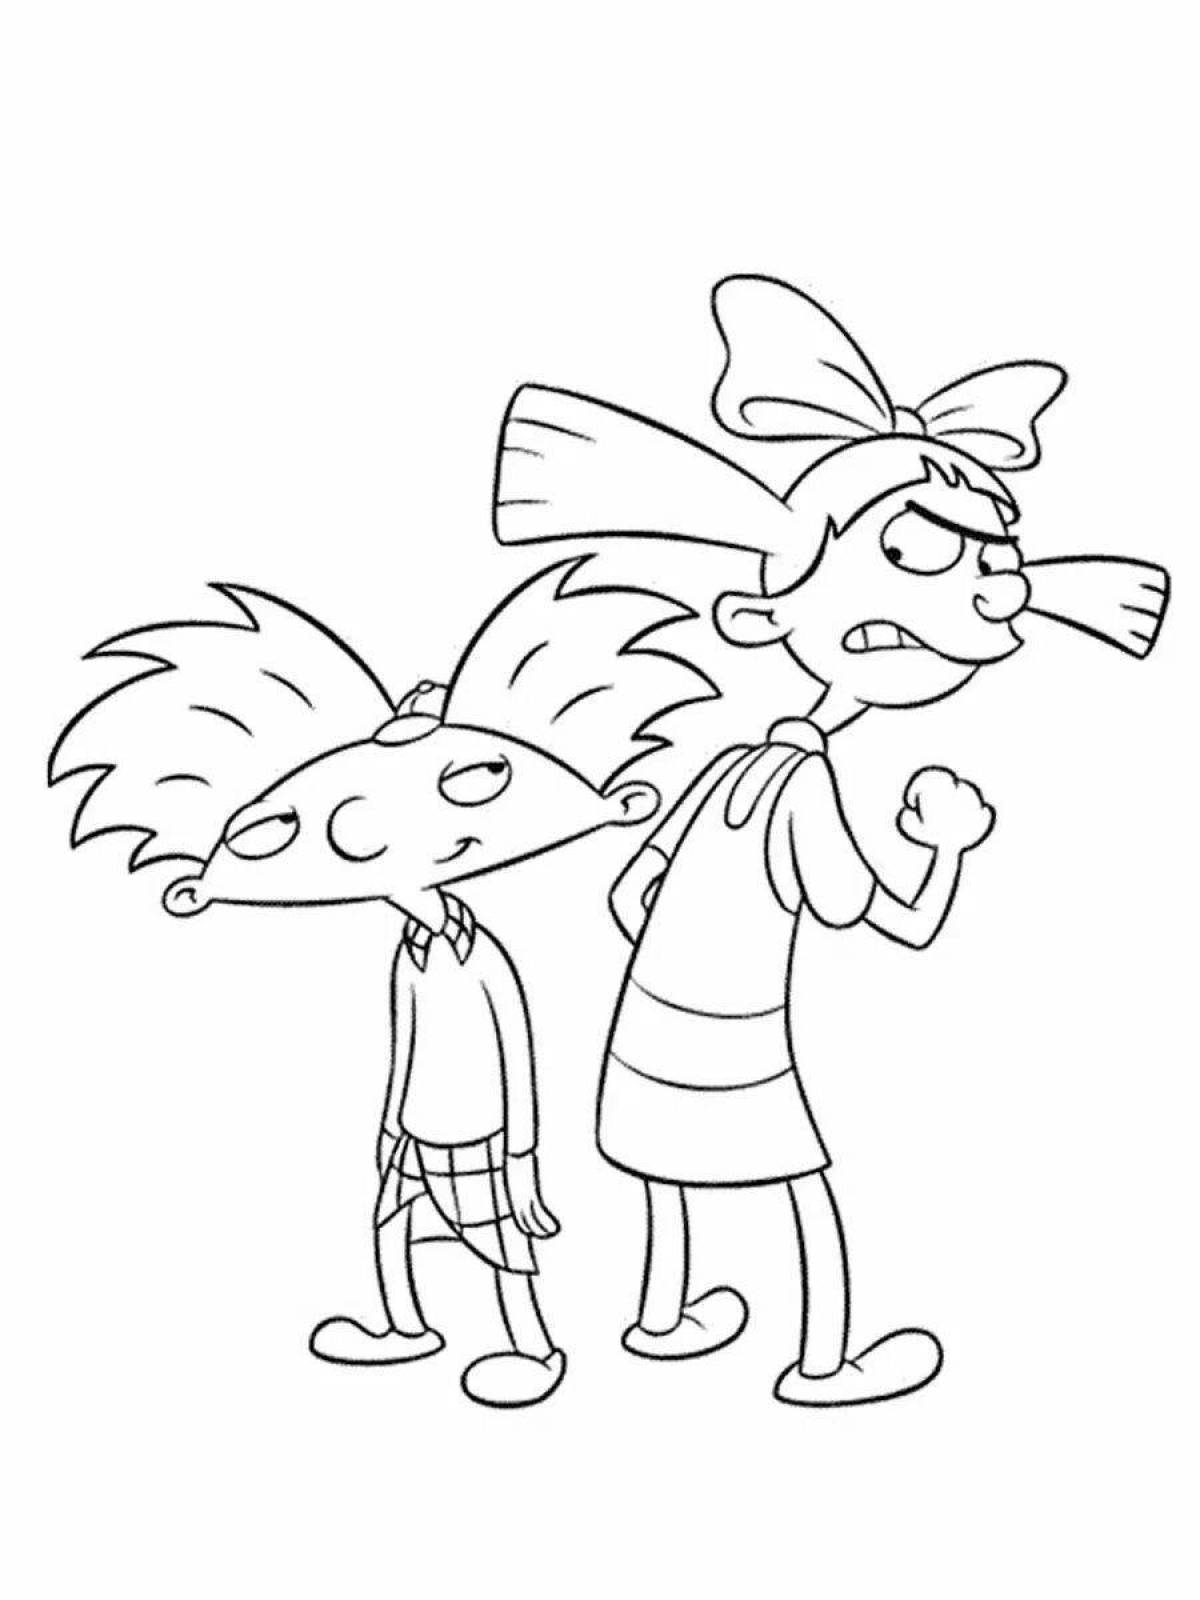 Splendid hey, arnold coloring page